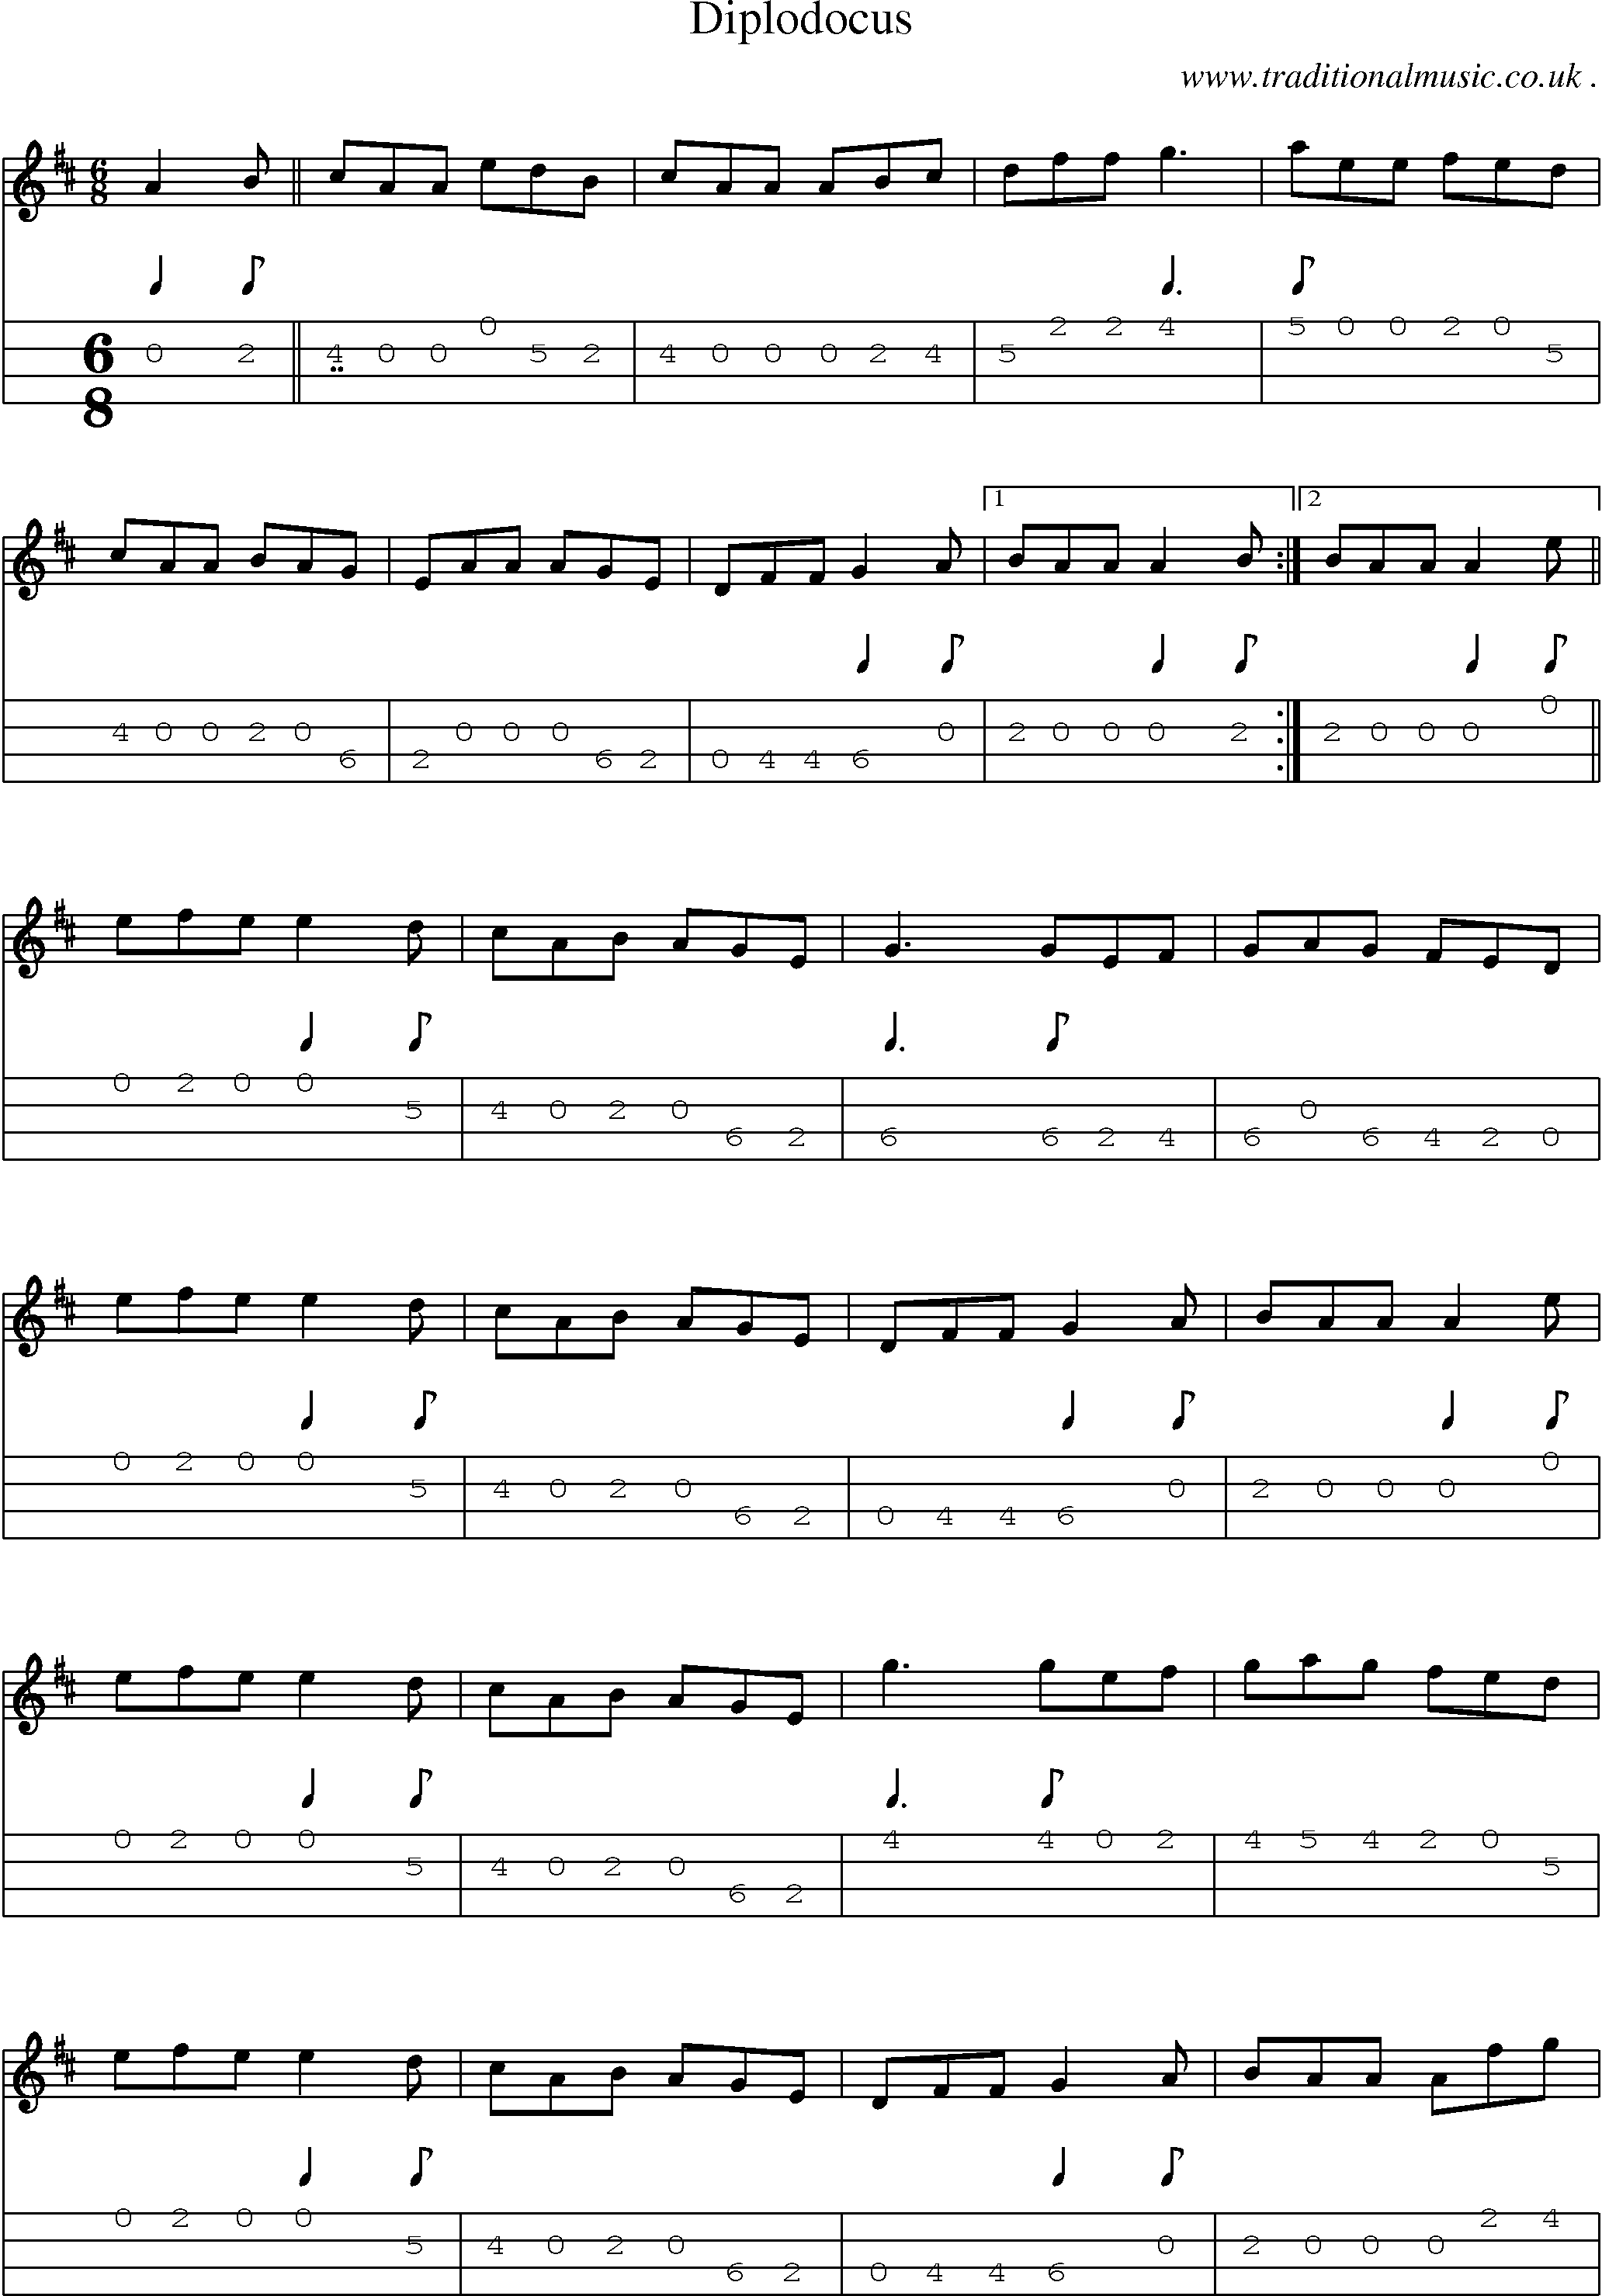 Sheet-Music and Mandolin Tabs for Diplodocus